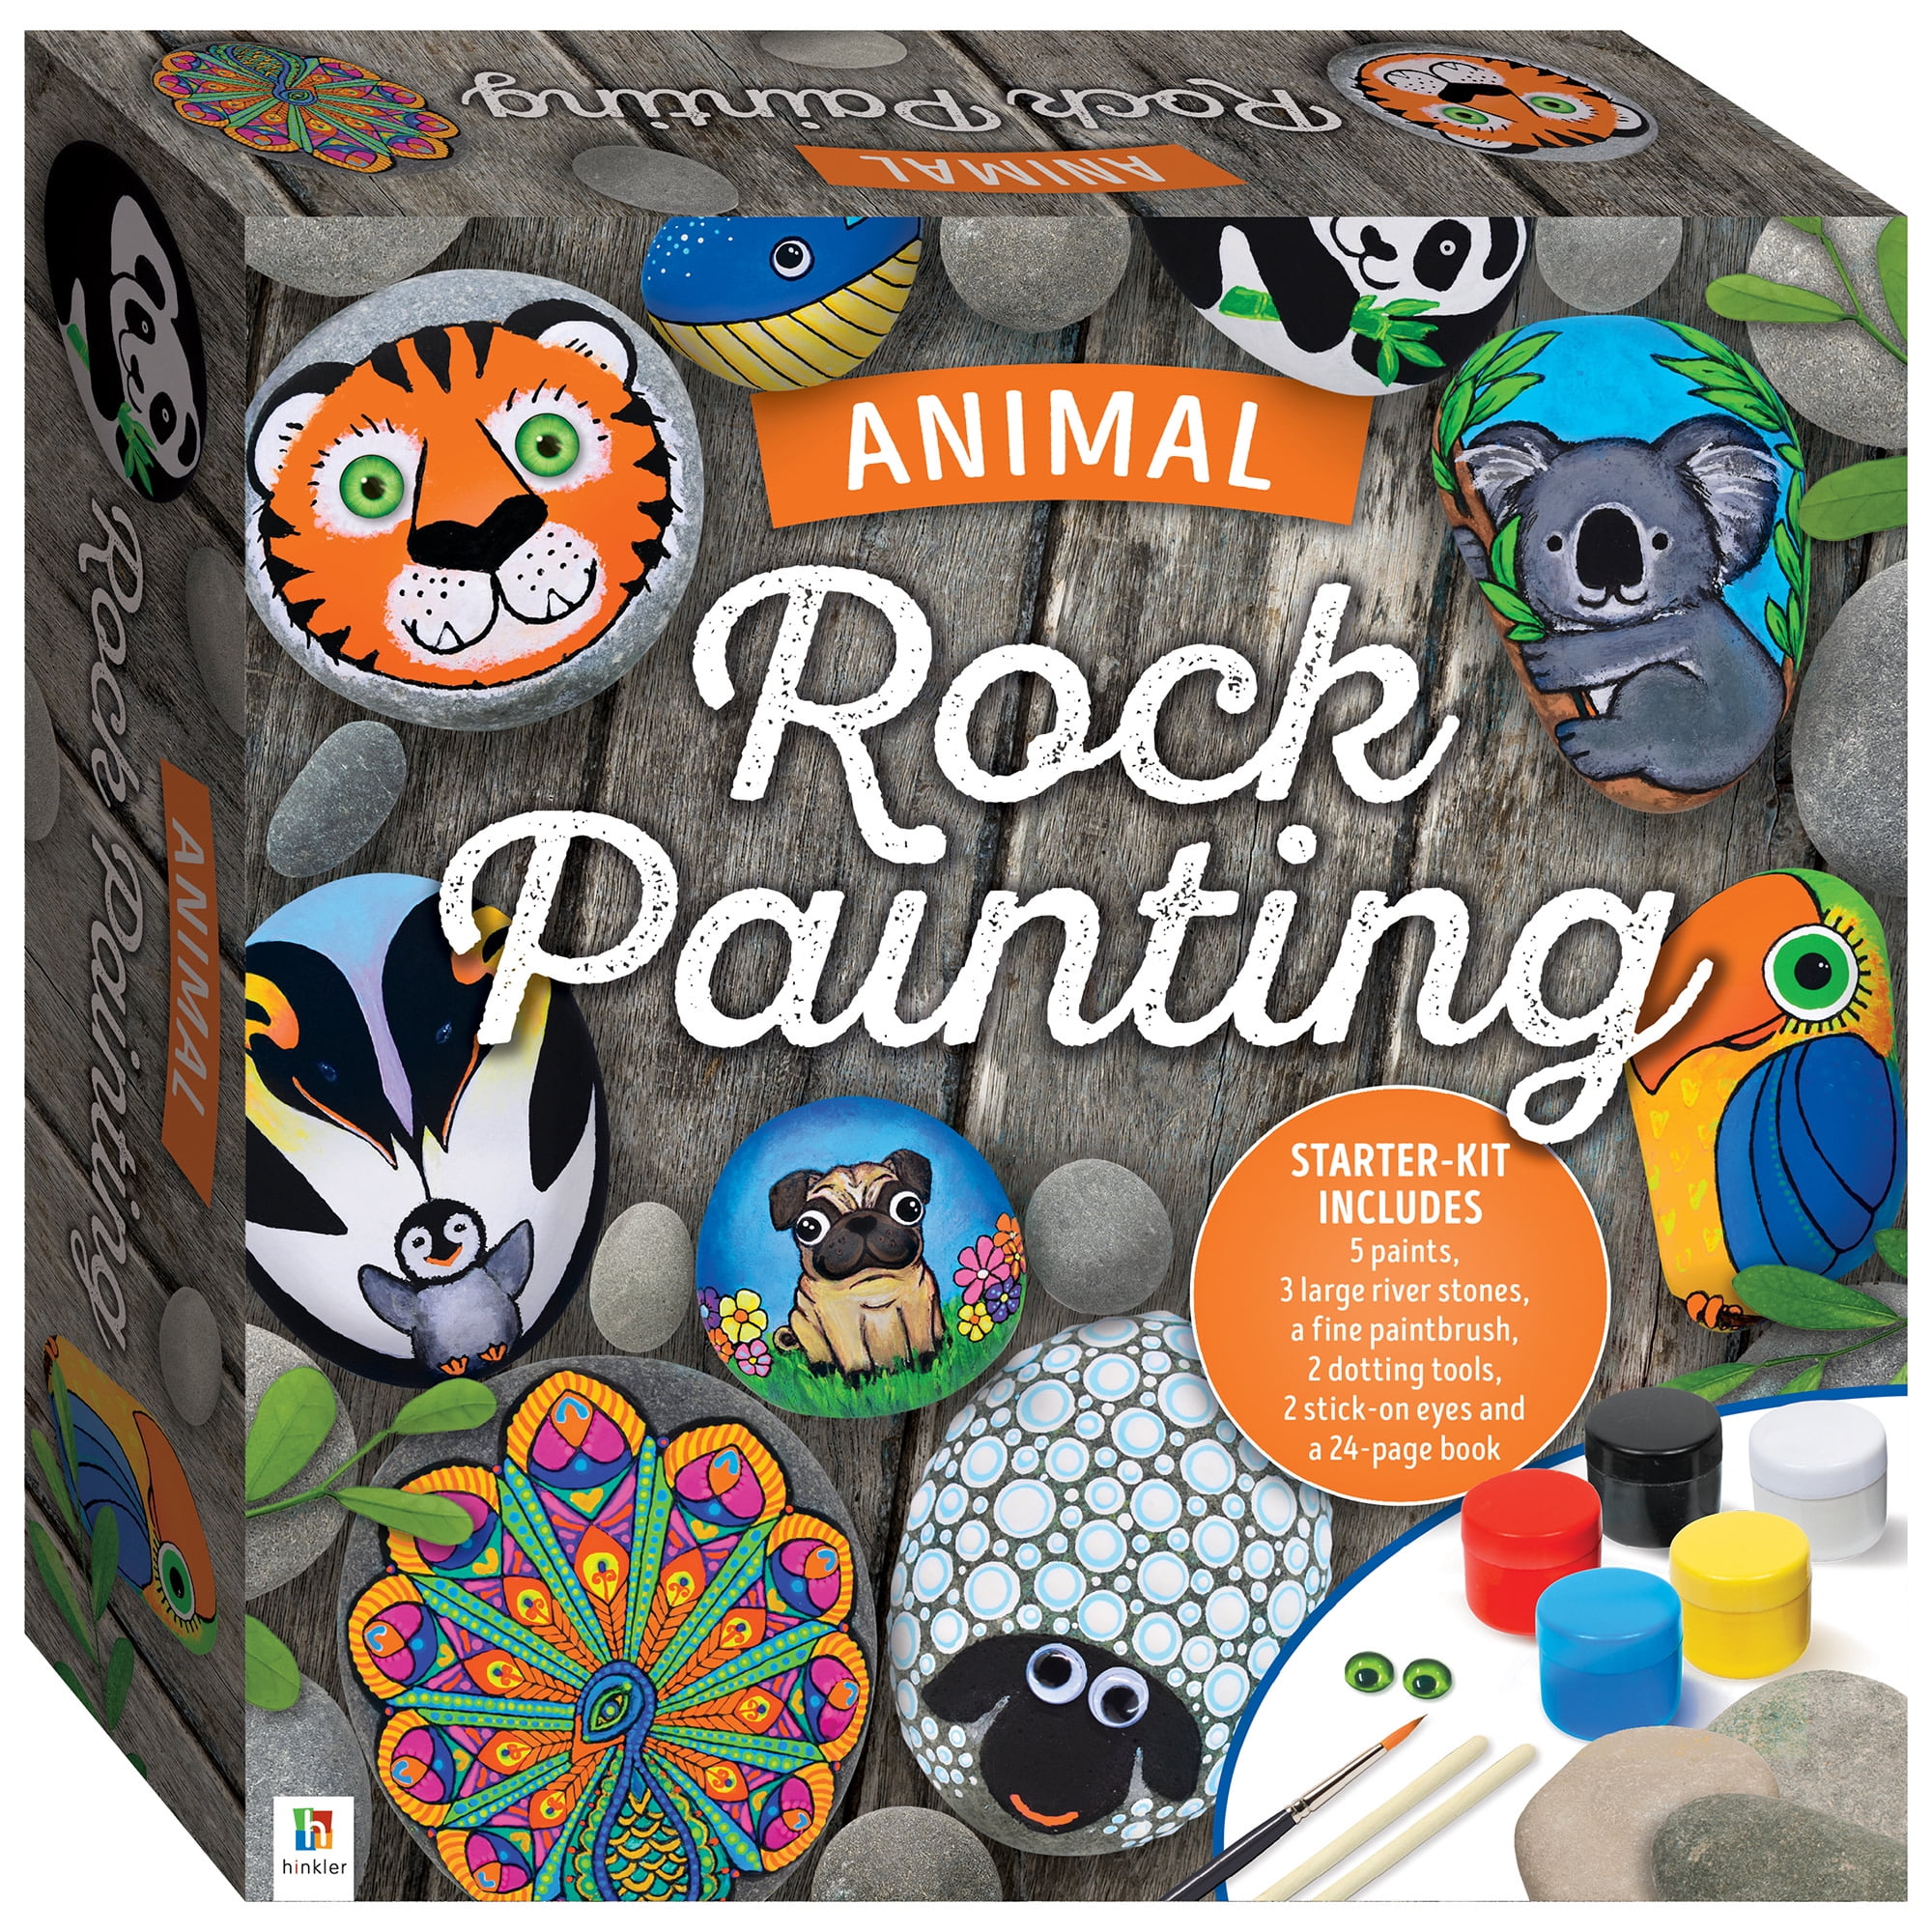 Animal Rock Painting Box Set - DIY Rock Painting for Adults